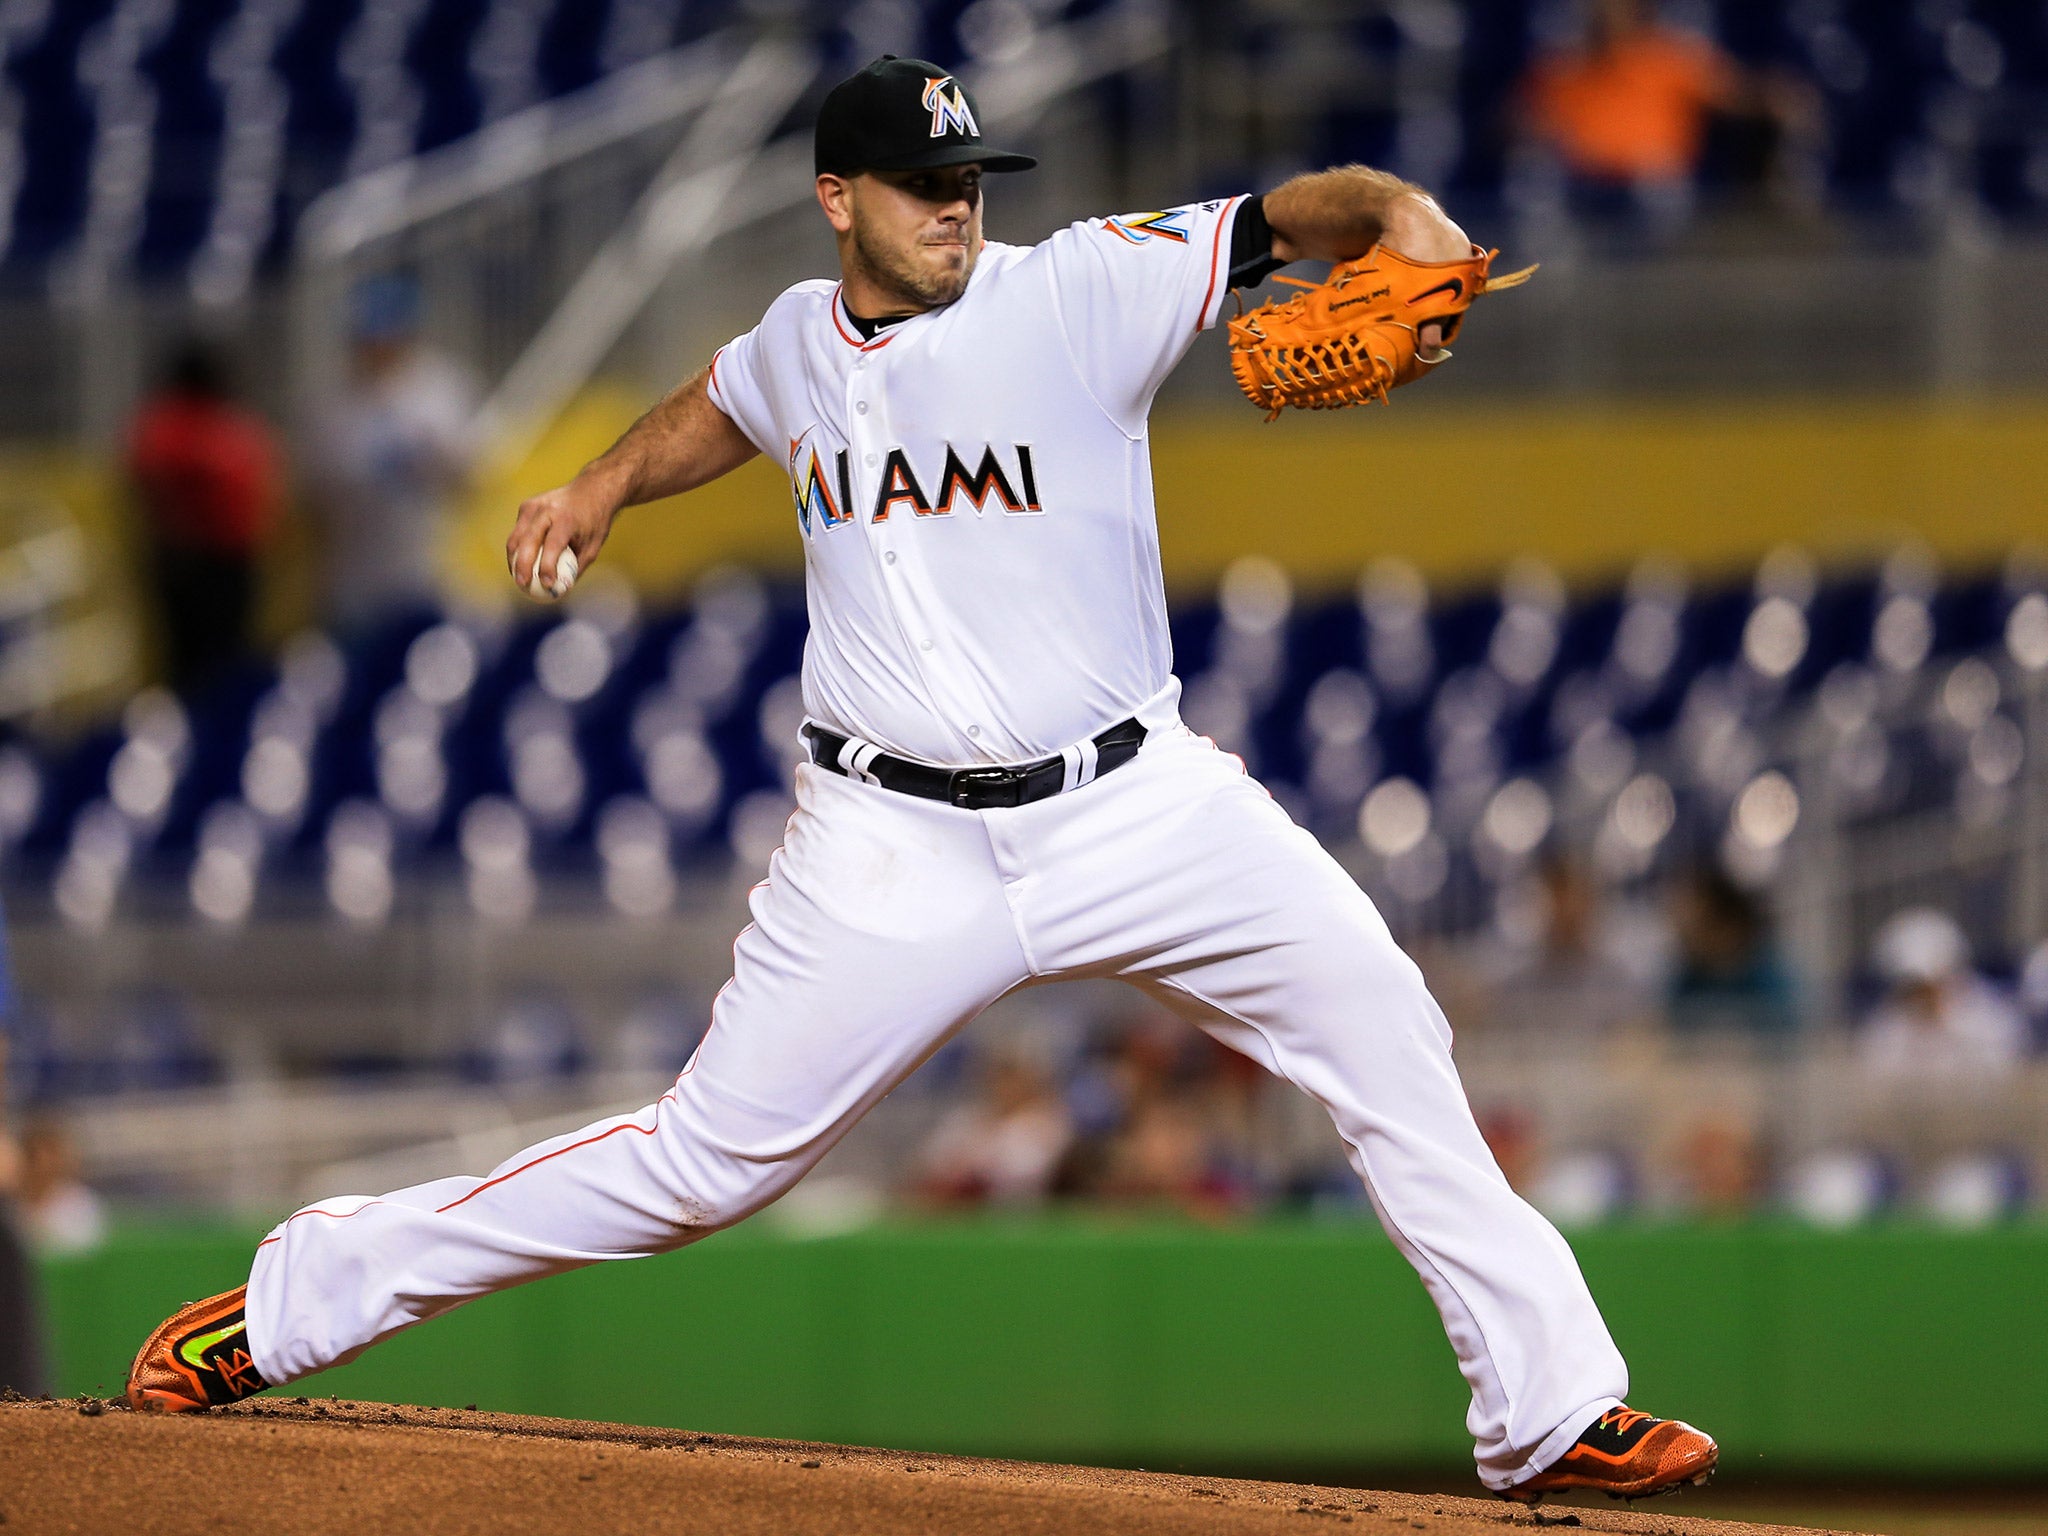 Fernandez was a rising star in Major League Baseball and was the first pitcher in the modern era to win his first 17 career home decisions